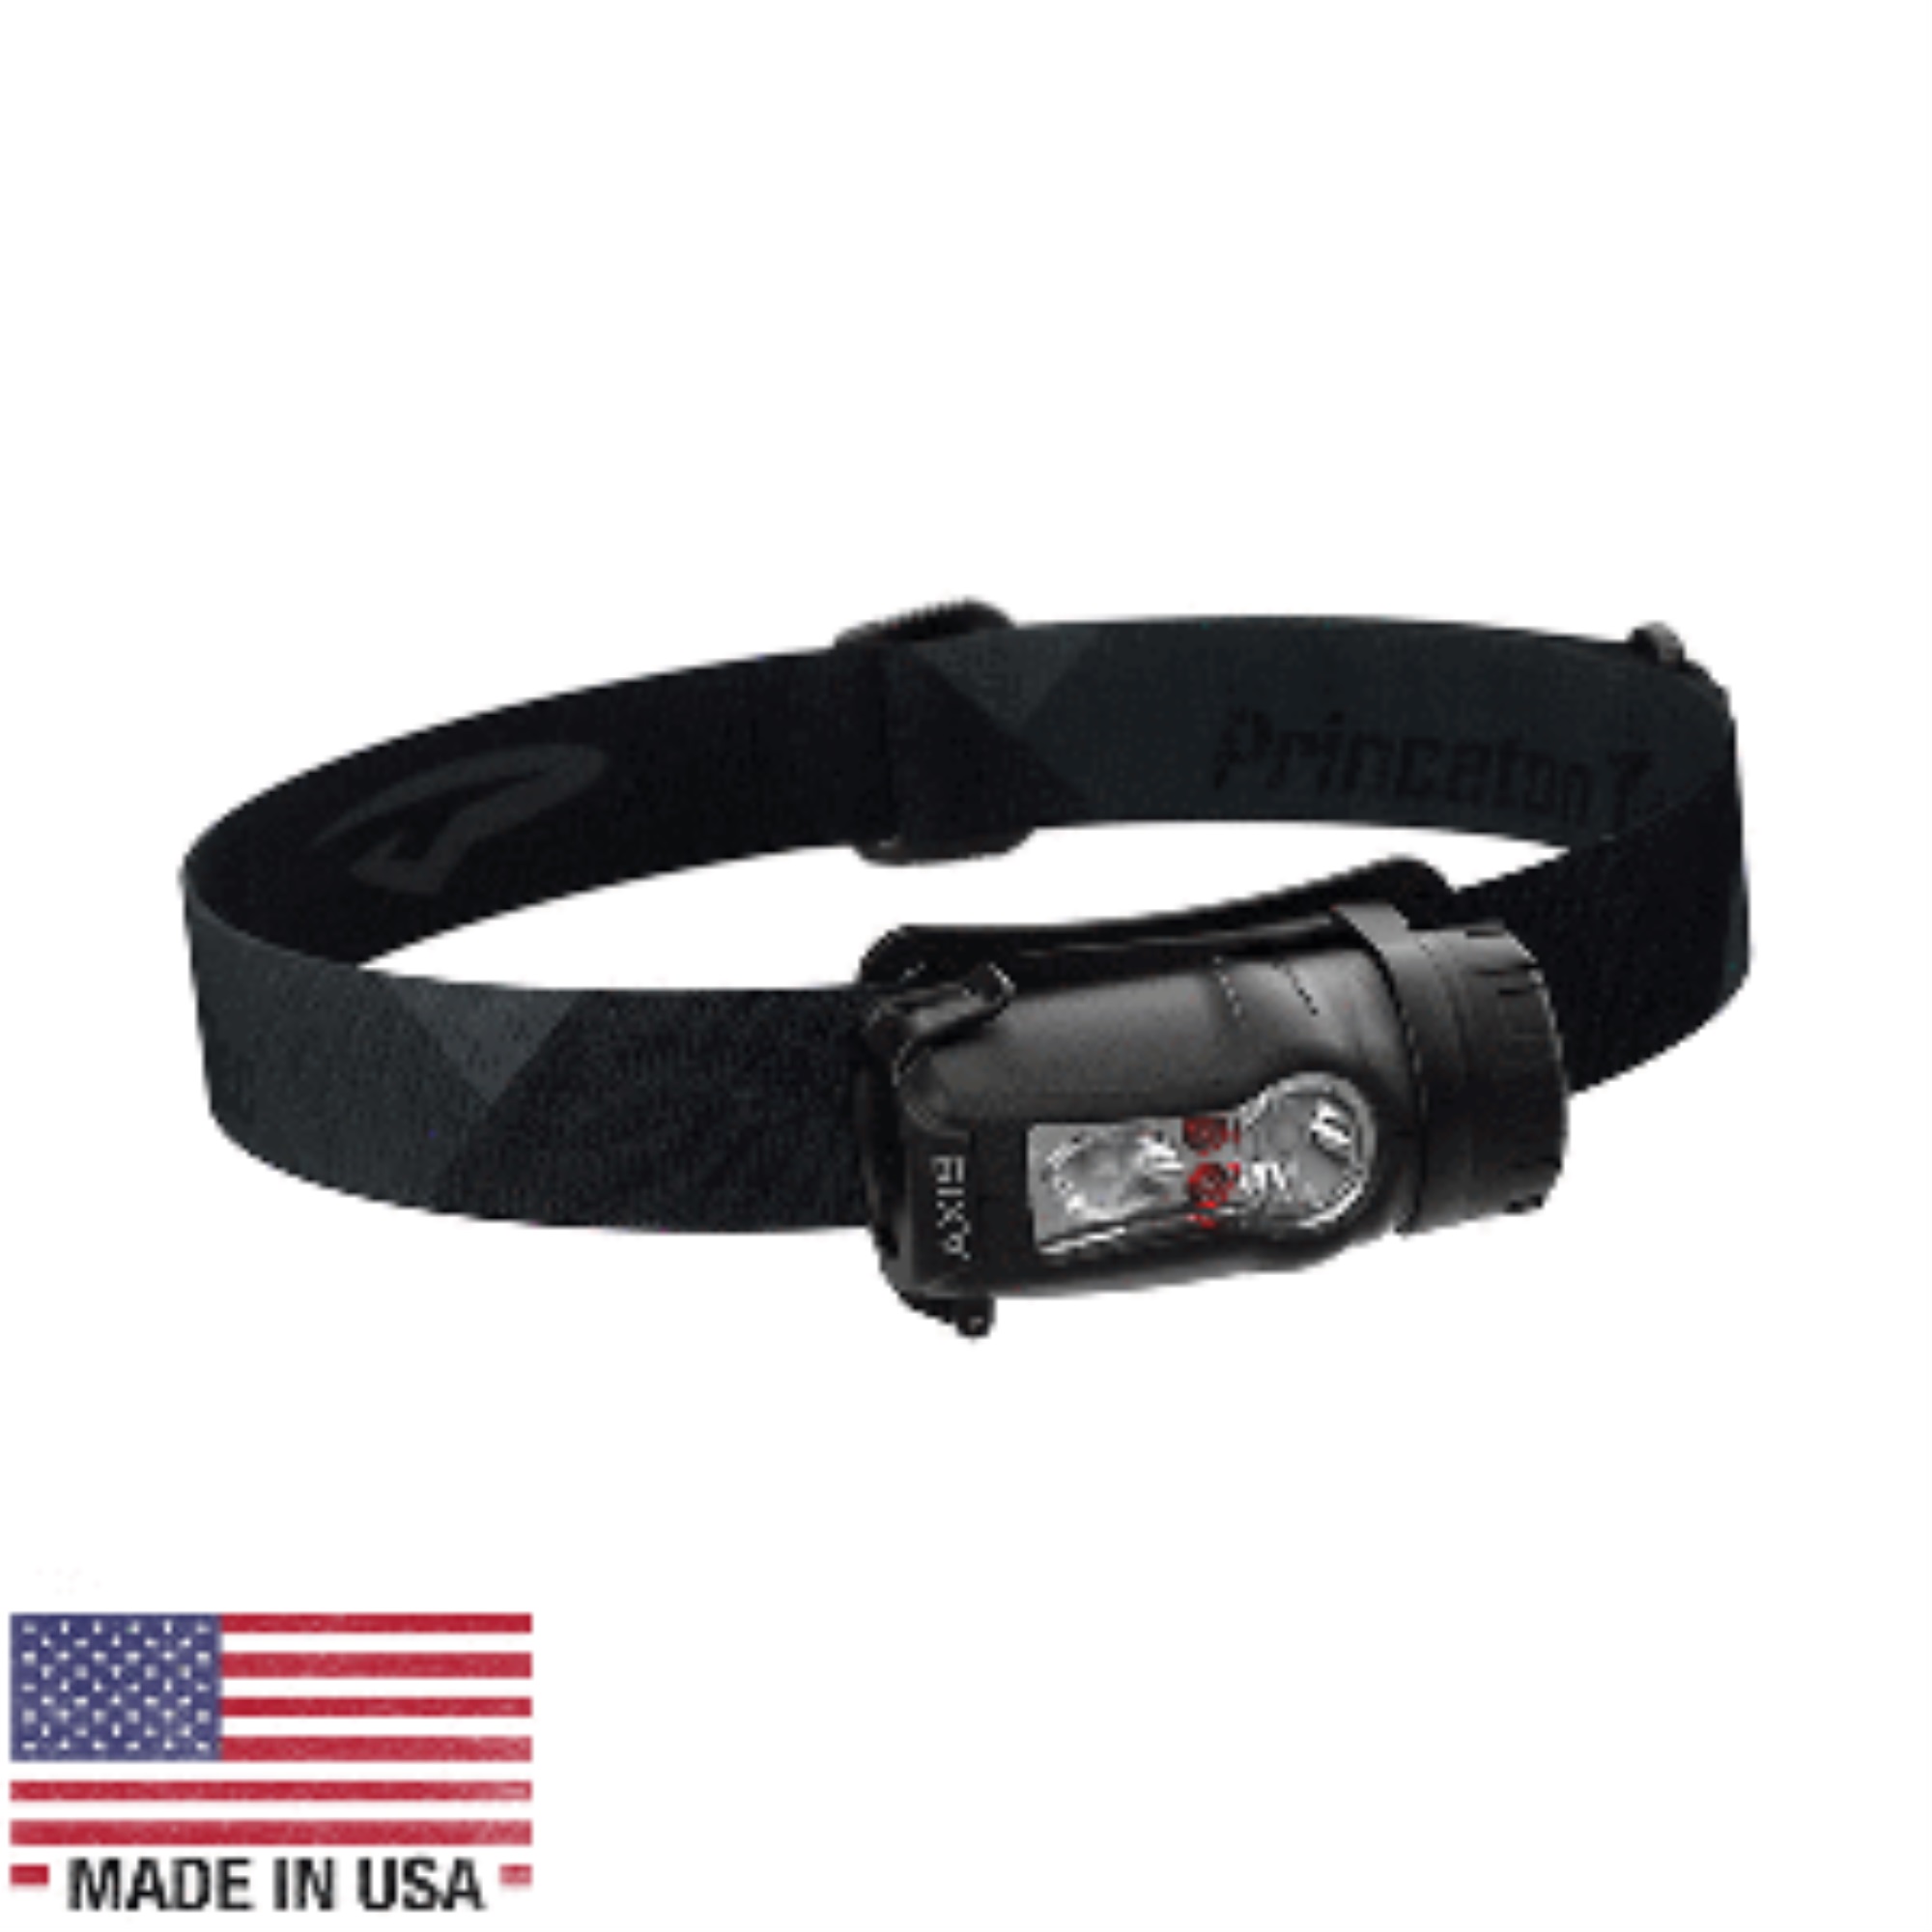 Princeton Tec Axis Rechargeable LED HeadLamp - Black/Grey - image 1 of 2